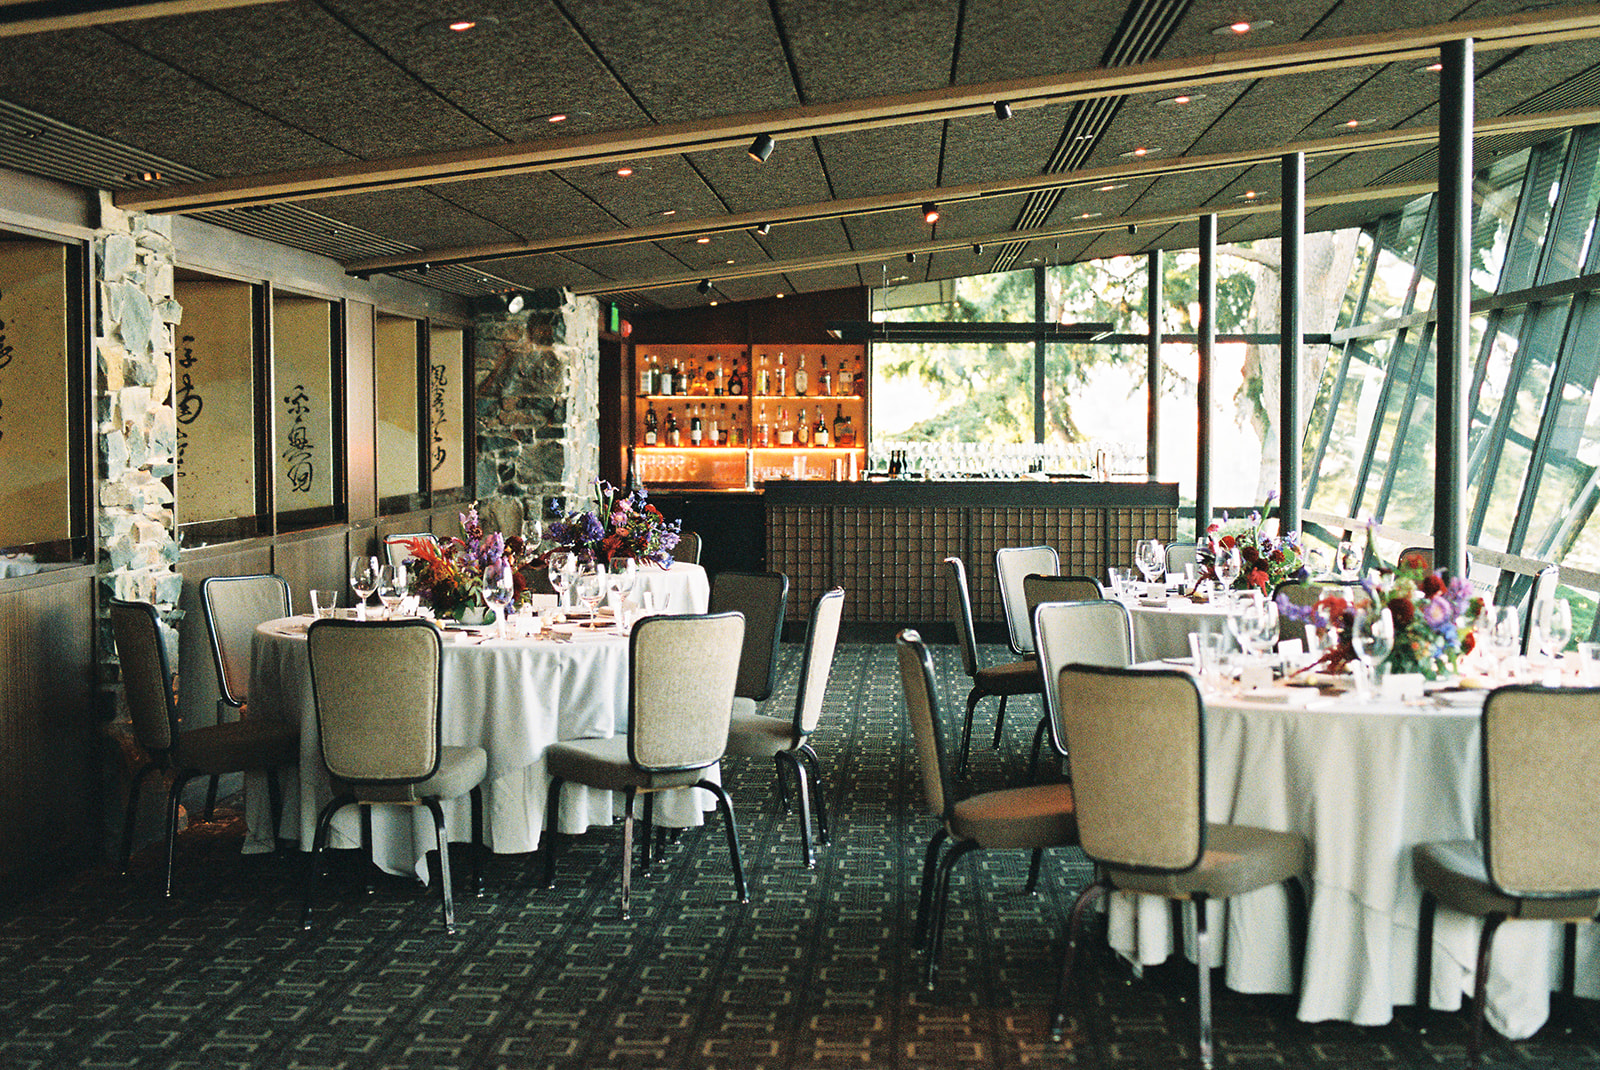 Elegant dining room at Canlis with round tables set with white linens, floral centerpieces, and a well-stocked bar in the background.